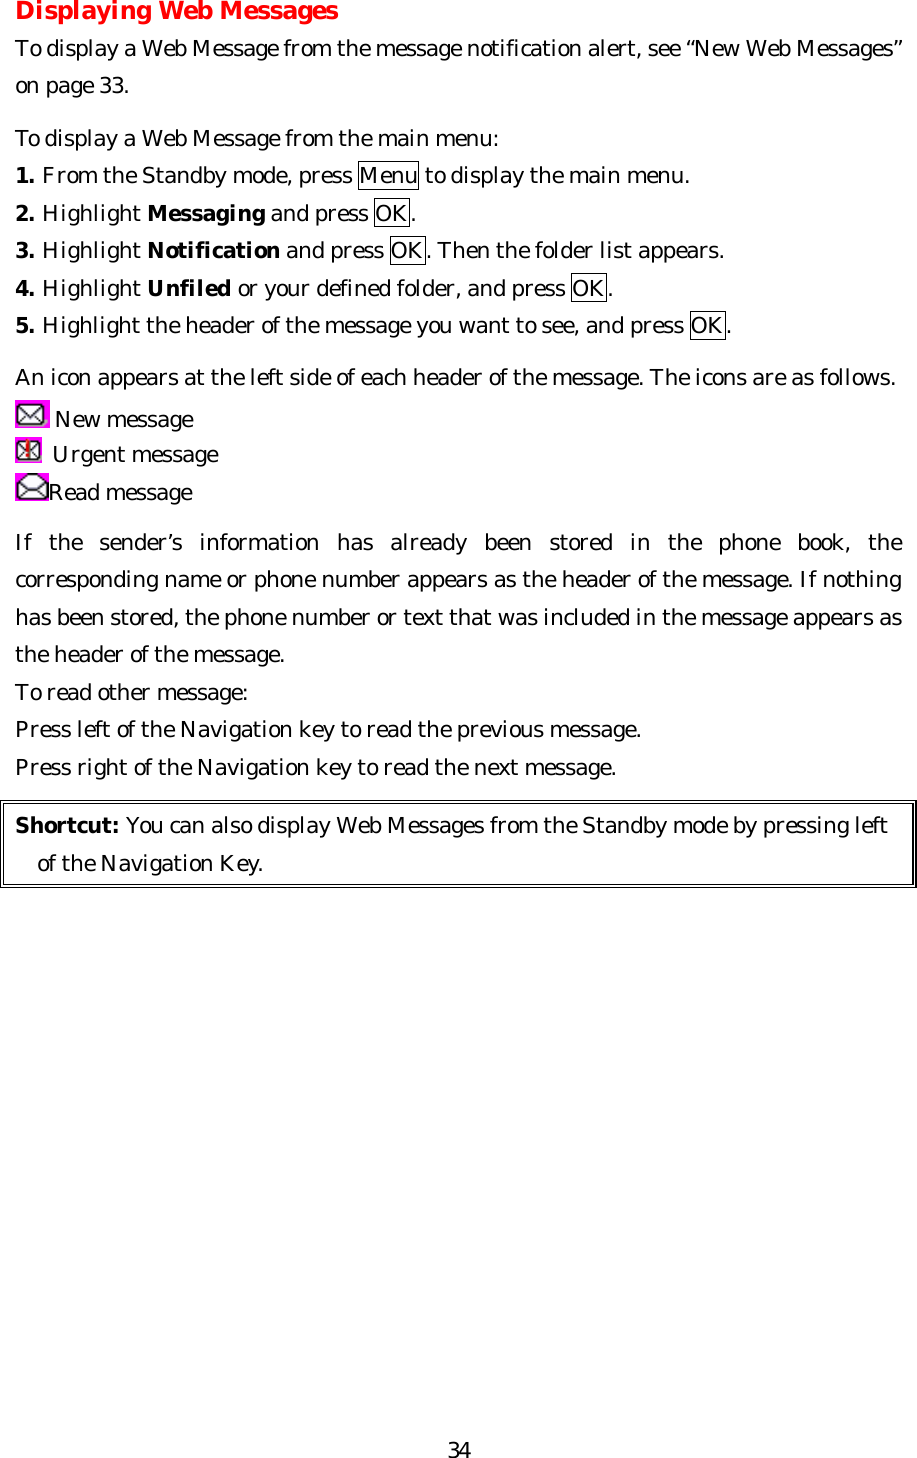   34Displaying Web Messages To display a Web Message from the message notification alert, see “New Web Messages” on page 33.  To display a Web Message from the main menu: 1. From the Standby mode, press Menu to display the main menu. 2. Highlight Messaging and press OK. 3. Highlight Notification and press OK. Then the folder list appears. 4. Highlight Unfiled or your defined folder, and press OK. 5. Highlight the header of the message you want to see, and press OK.  An icon appears at the left side of each header of the message. The icons are as follows.  New message  Urgent message Read message  If the sender’s information has already been stored in the phone book, the corresponding name or phone number appears as the header of the message. If nothing has been stored, the phone number or text that was included in the message appears as the header of the message. To read other message: Press left of the Navigation key to read the previous message. Press right of the Navigation key to read the next message.  Shortcut: You can also display Web Messages from the Standby mode by pressing left   of the Navigation Key.               